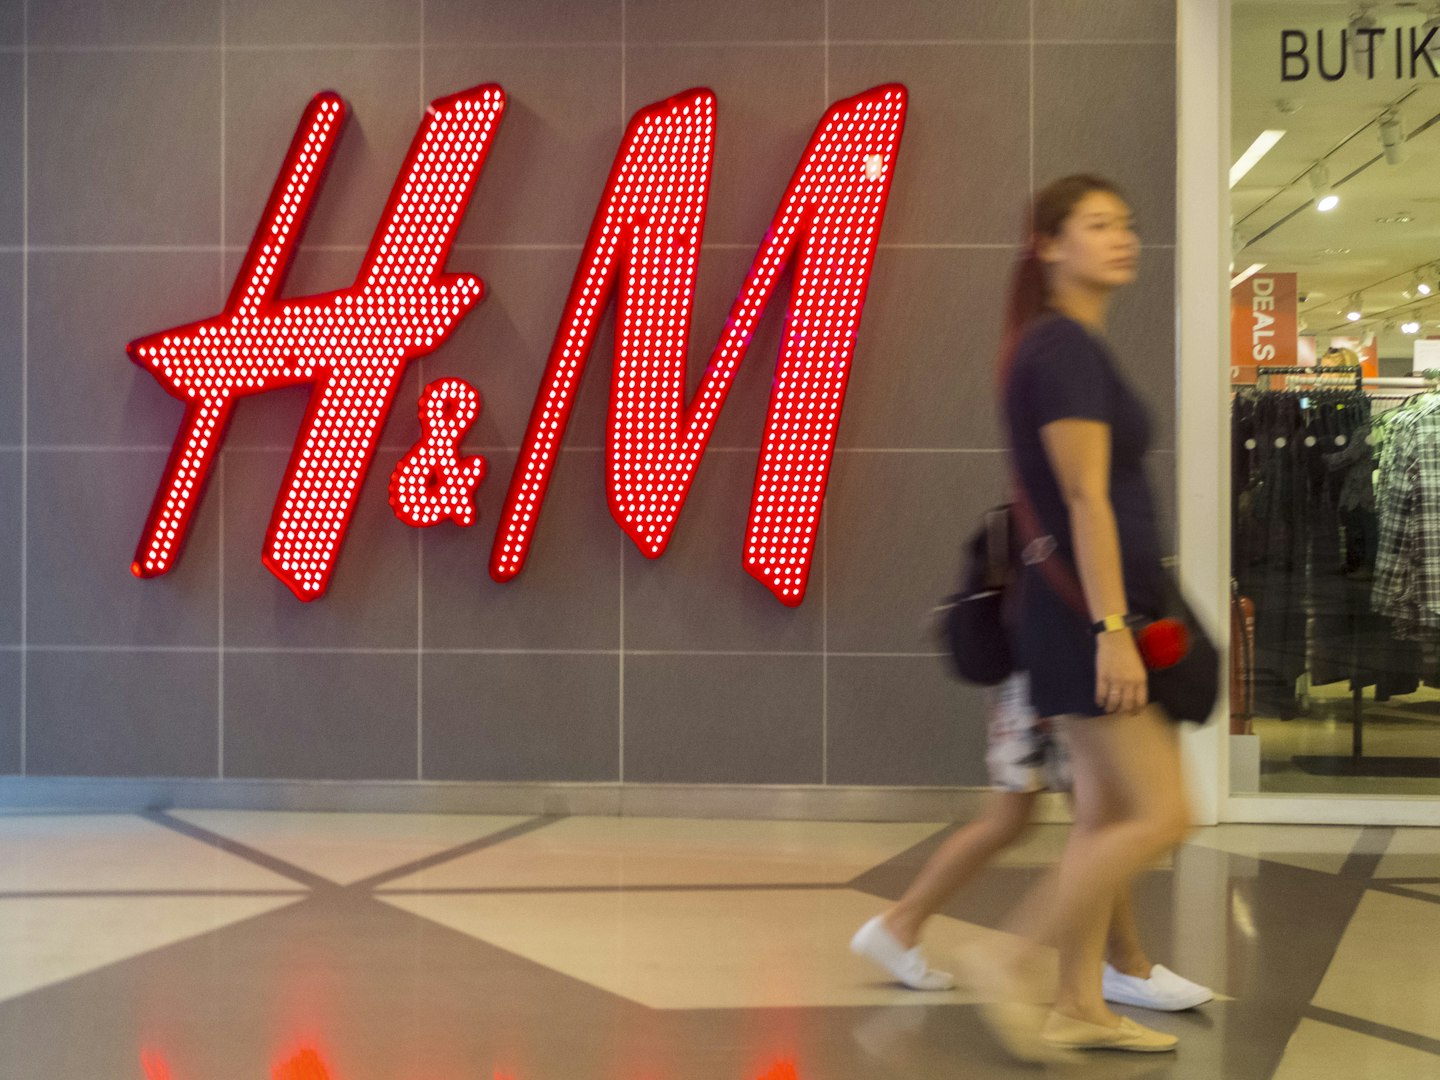 H&M Apologizes for 'Monkey' Image Featuring Black Child - The New York Times